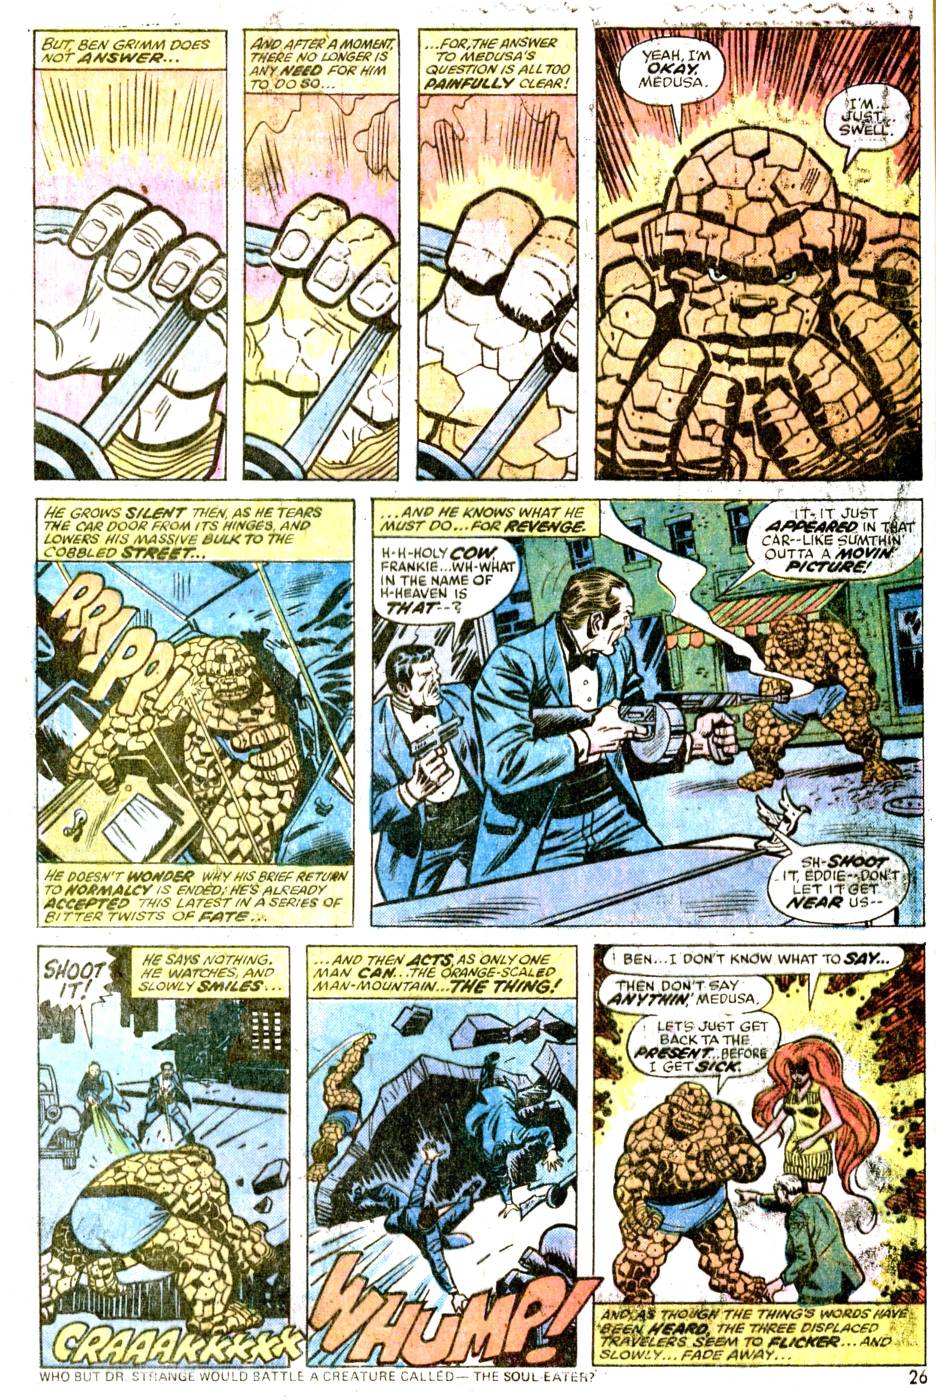 Read online Giant-Size Fantastic Four comic -  Issue #2 - 28